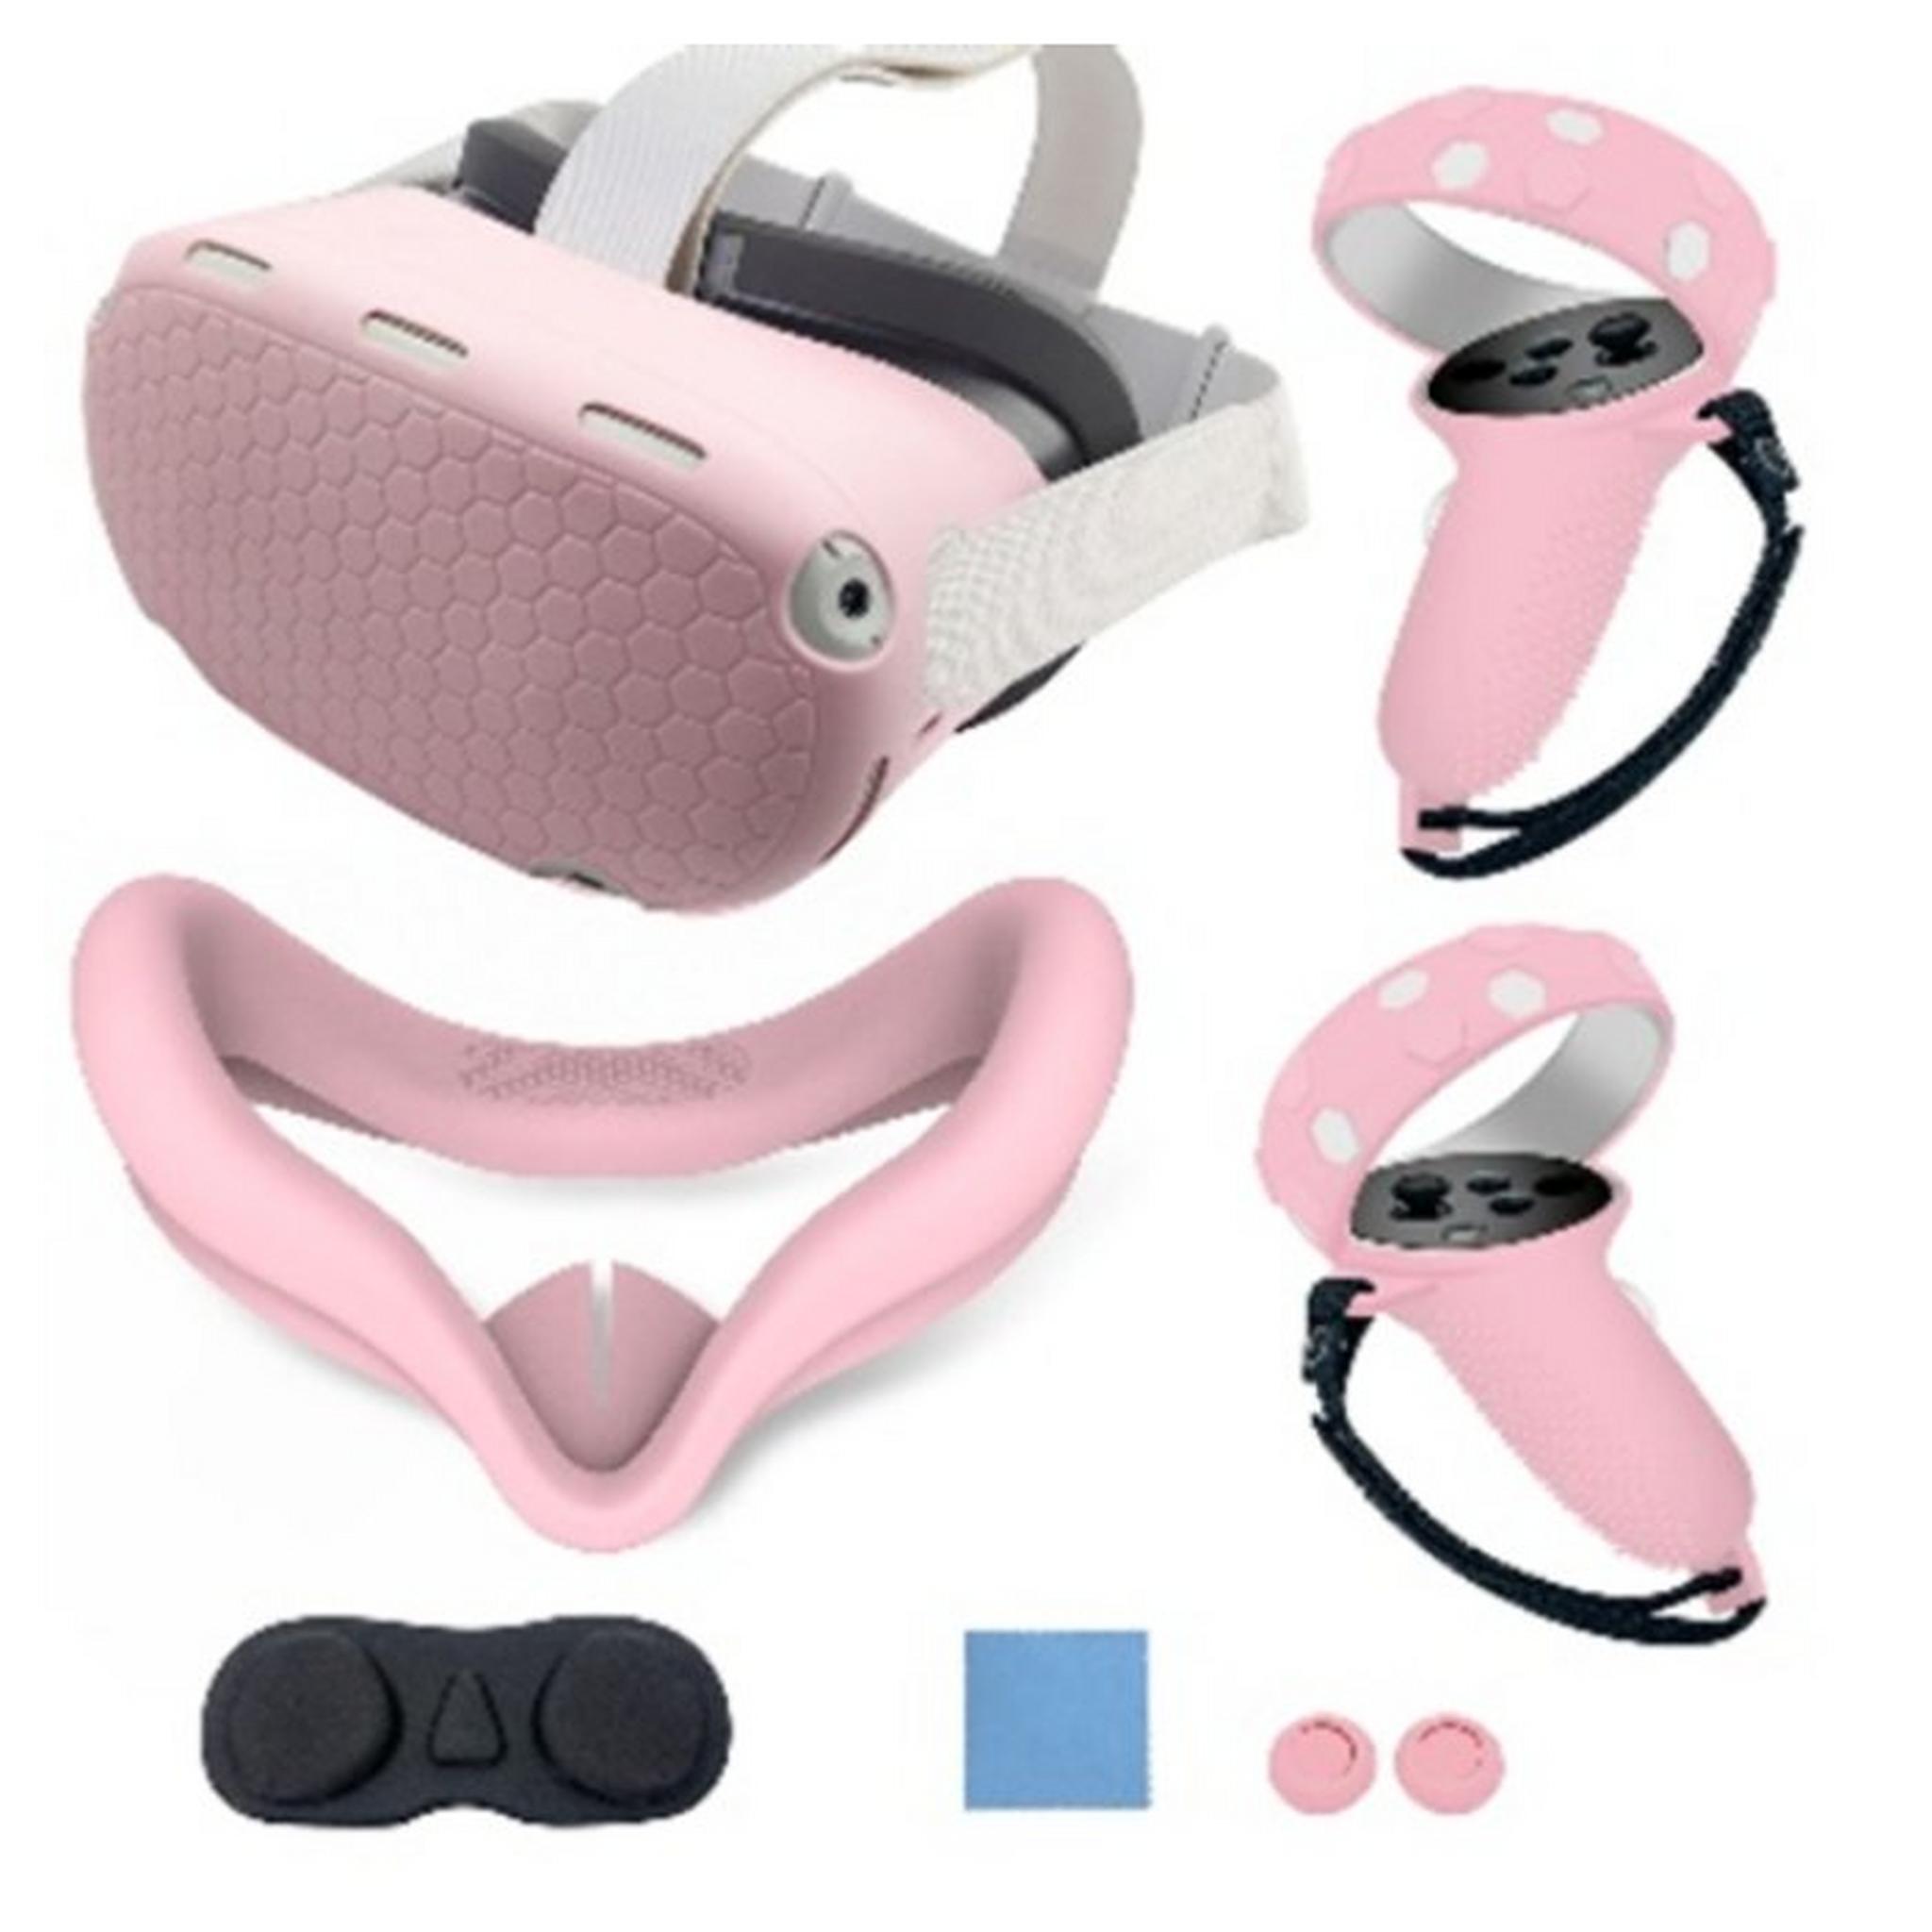 Gamax Oculus Quest 2 Silicone Protective Case Set - Pink